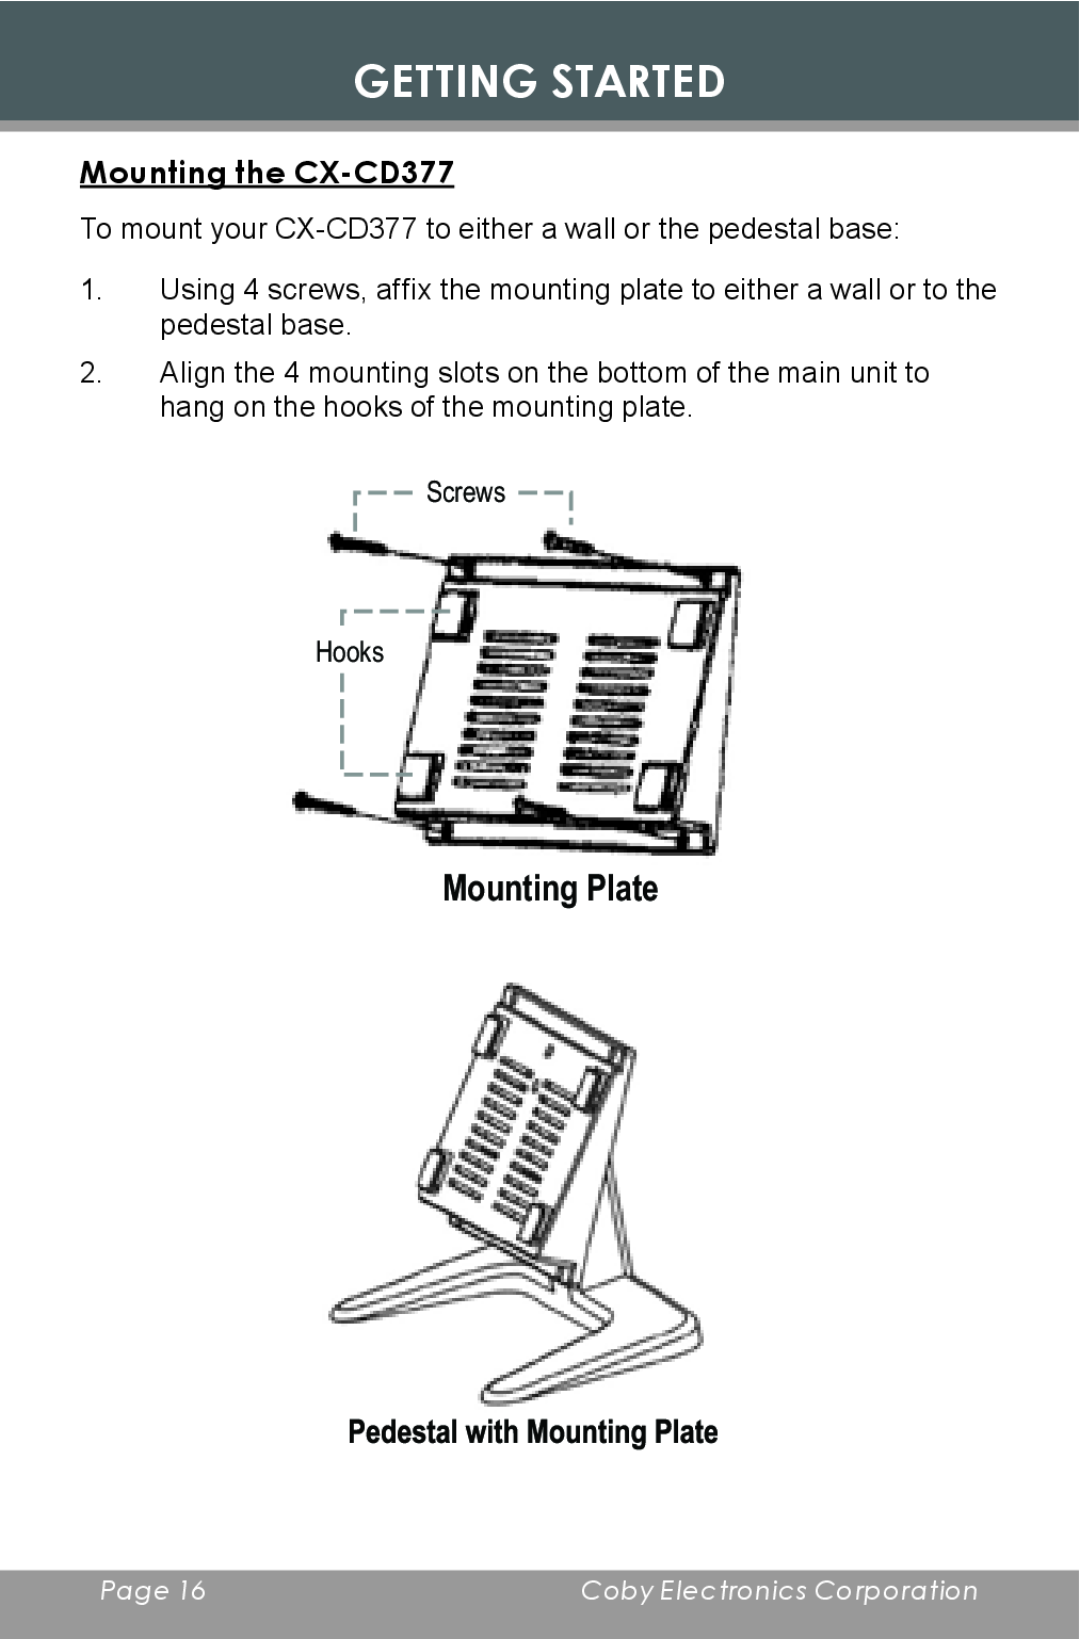 COBY electronic instruction manual Mounting the CX-CD377, Getting Started, Mounting Plate 